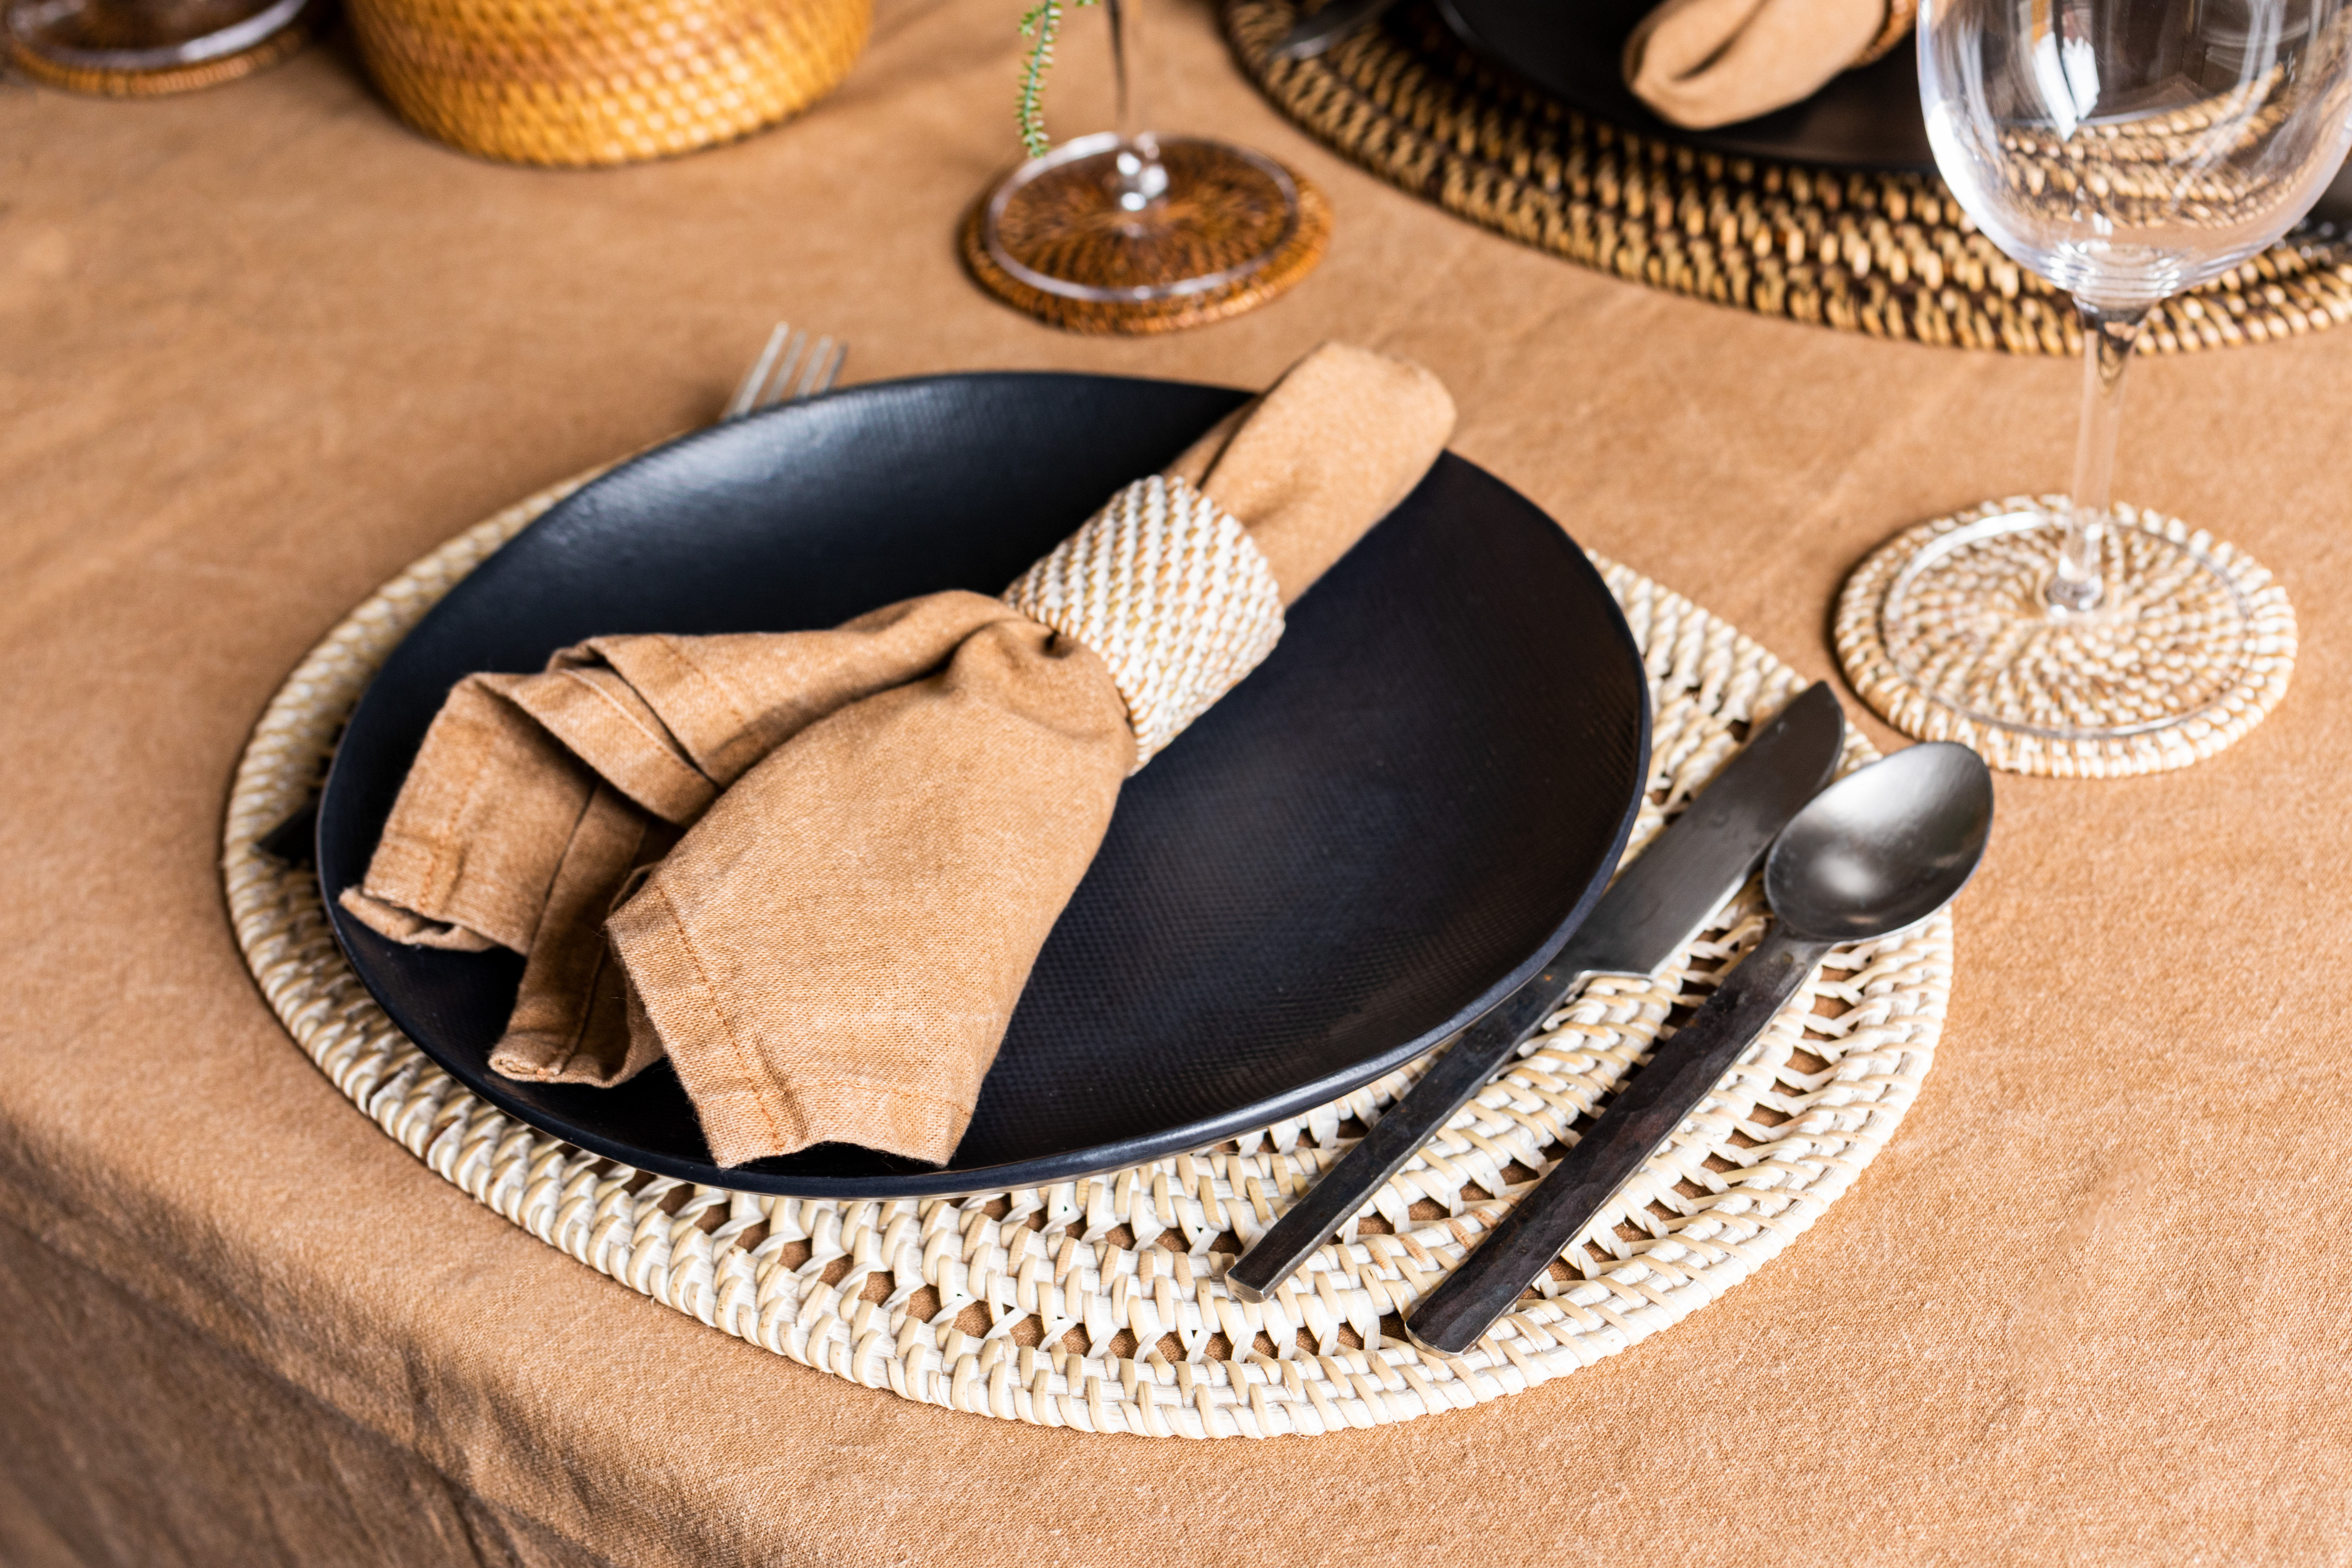 Table decoration with a white oval placemat, napkin rings, glass coasters in rattan material. Napkin and tablecloth in indiantan.